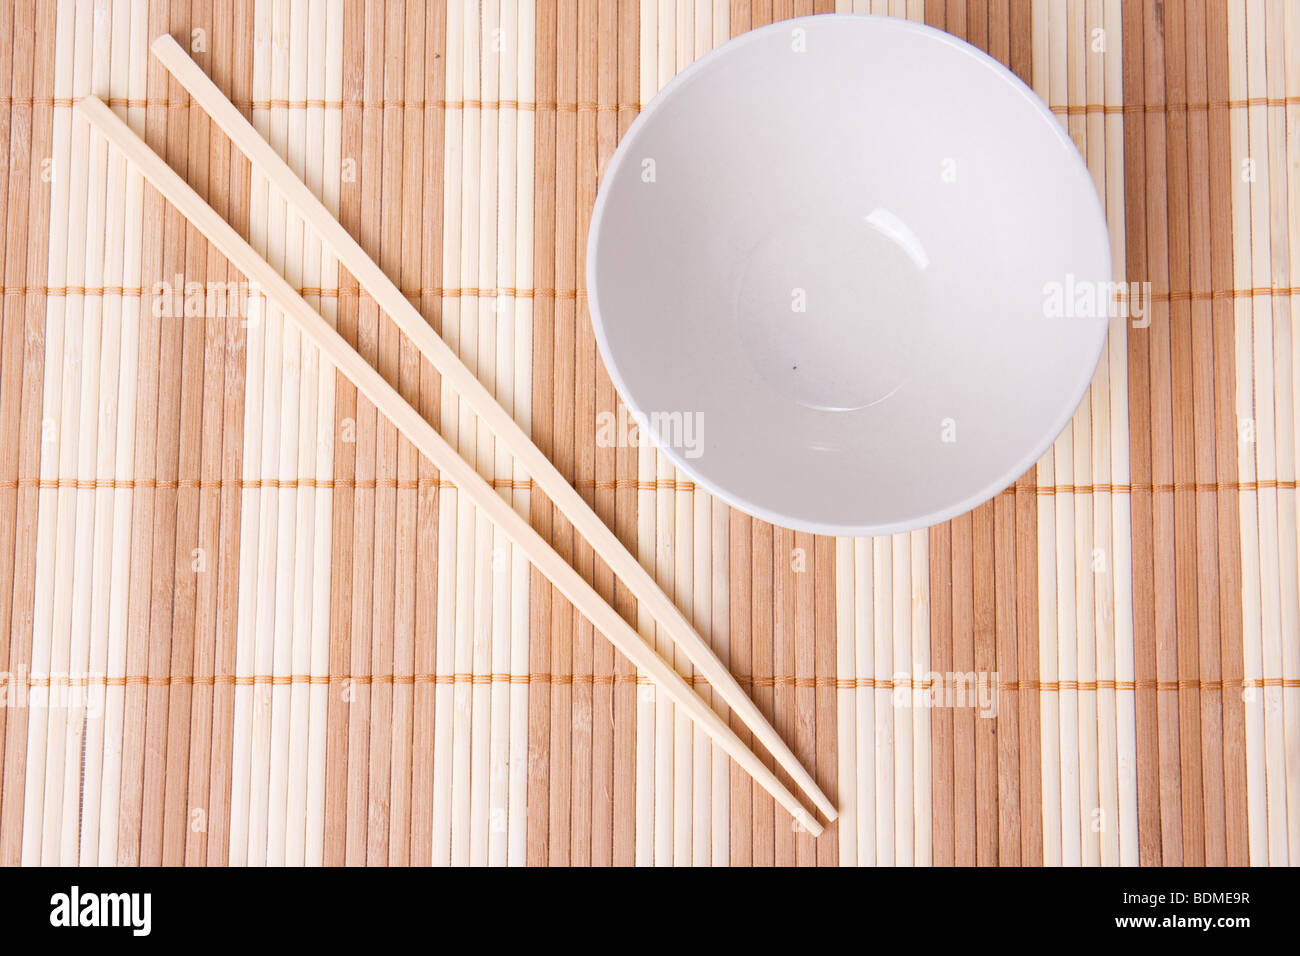 the empty bowl and chopsticks Stock Photo